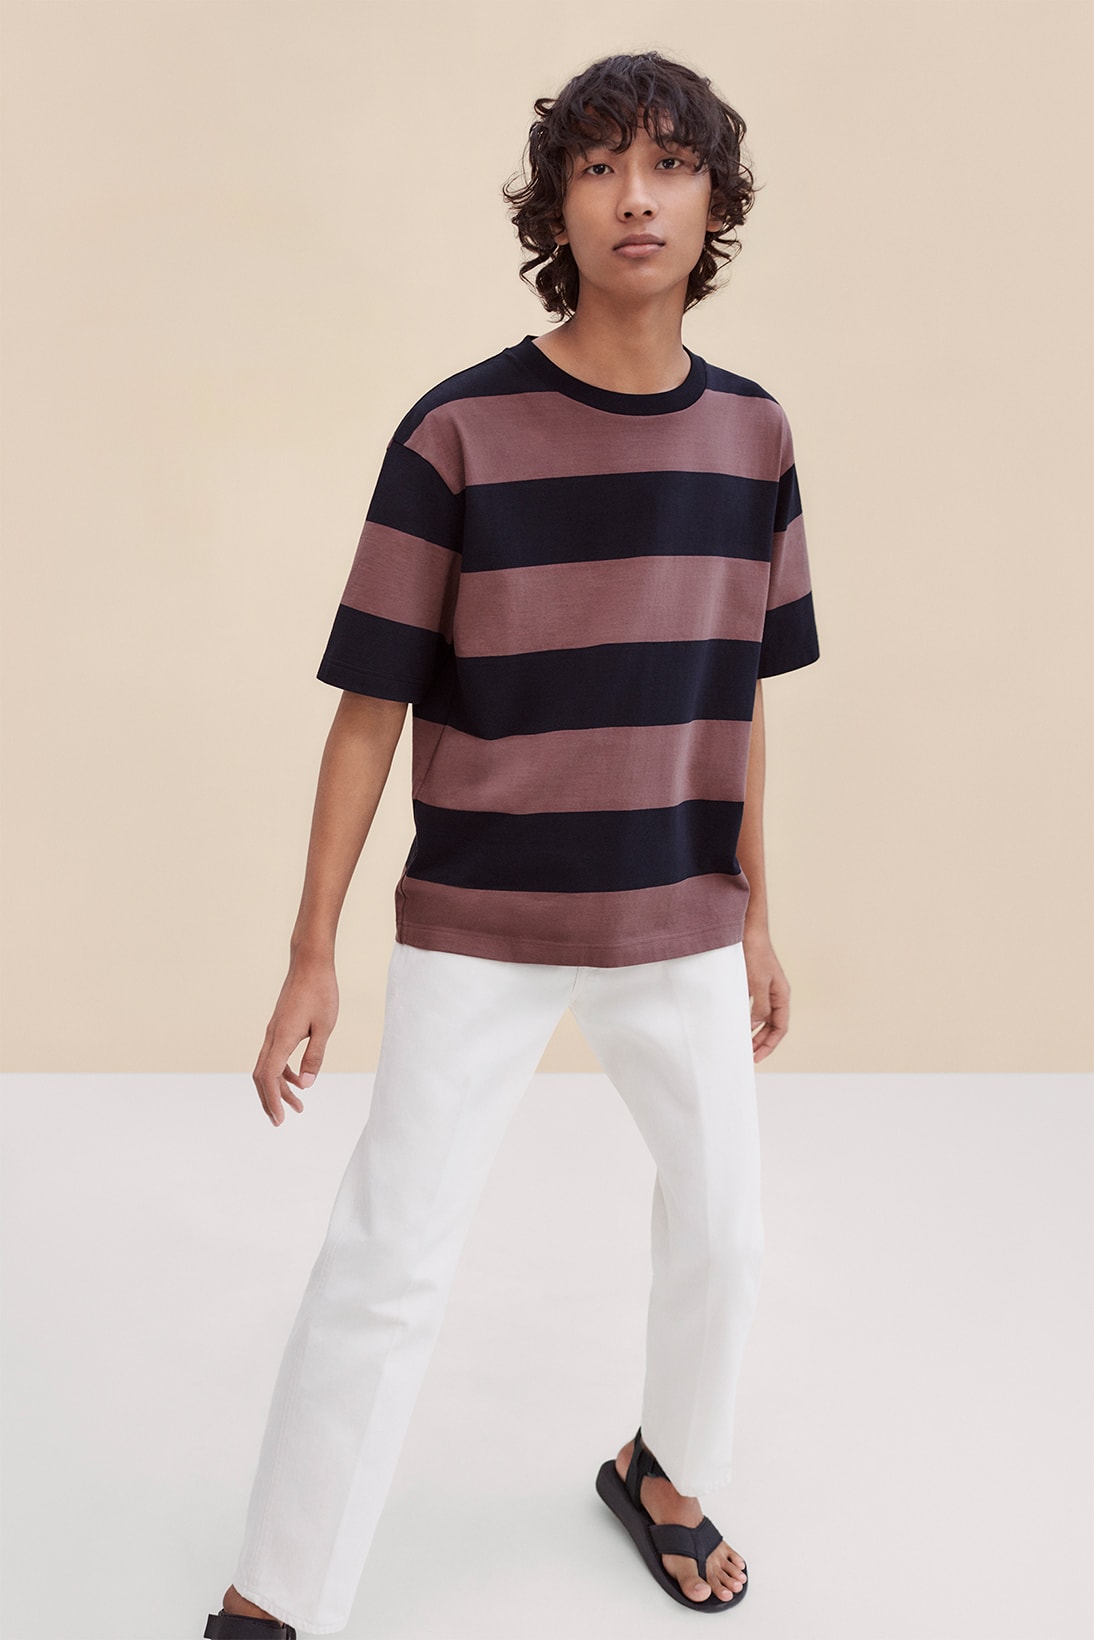 uniqlo u spring summer collection future lifewear essentials minimalist contemporary christophe lemaire blazers pants tank top 